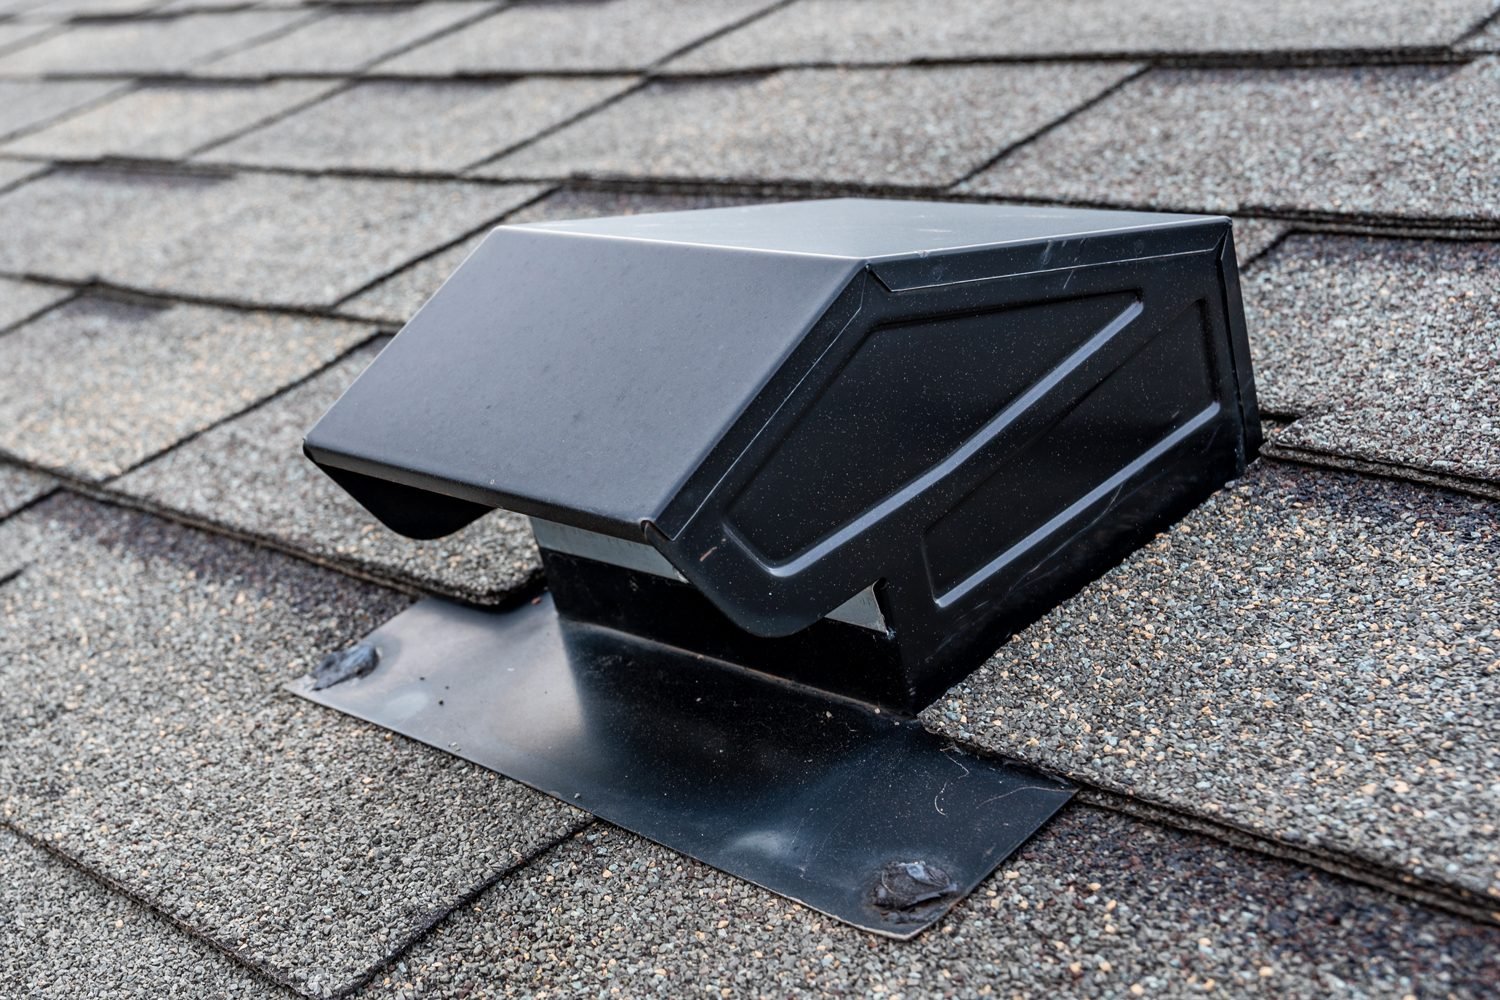 What You Should Know About Roof Dryer Vents